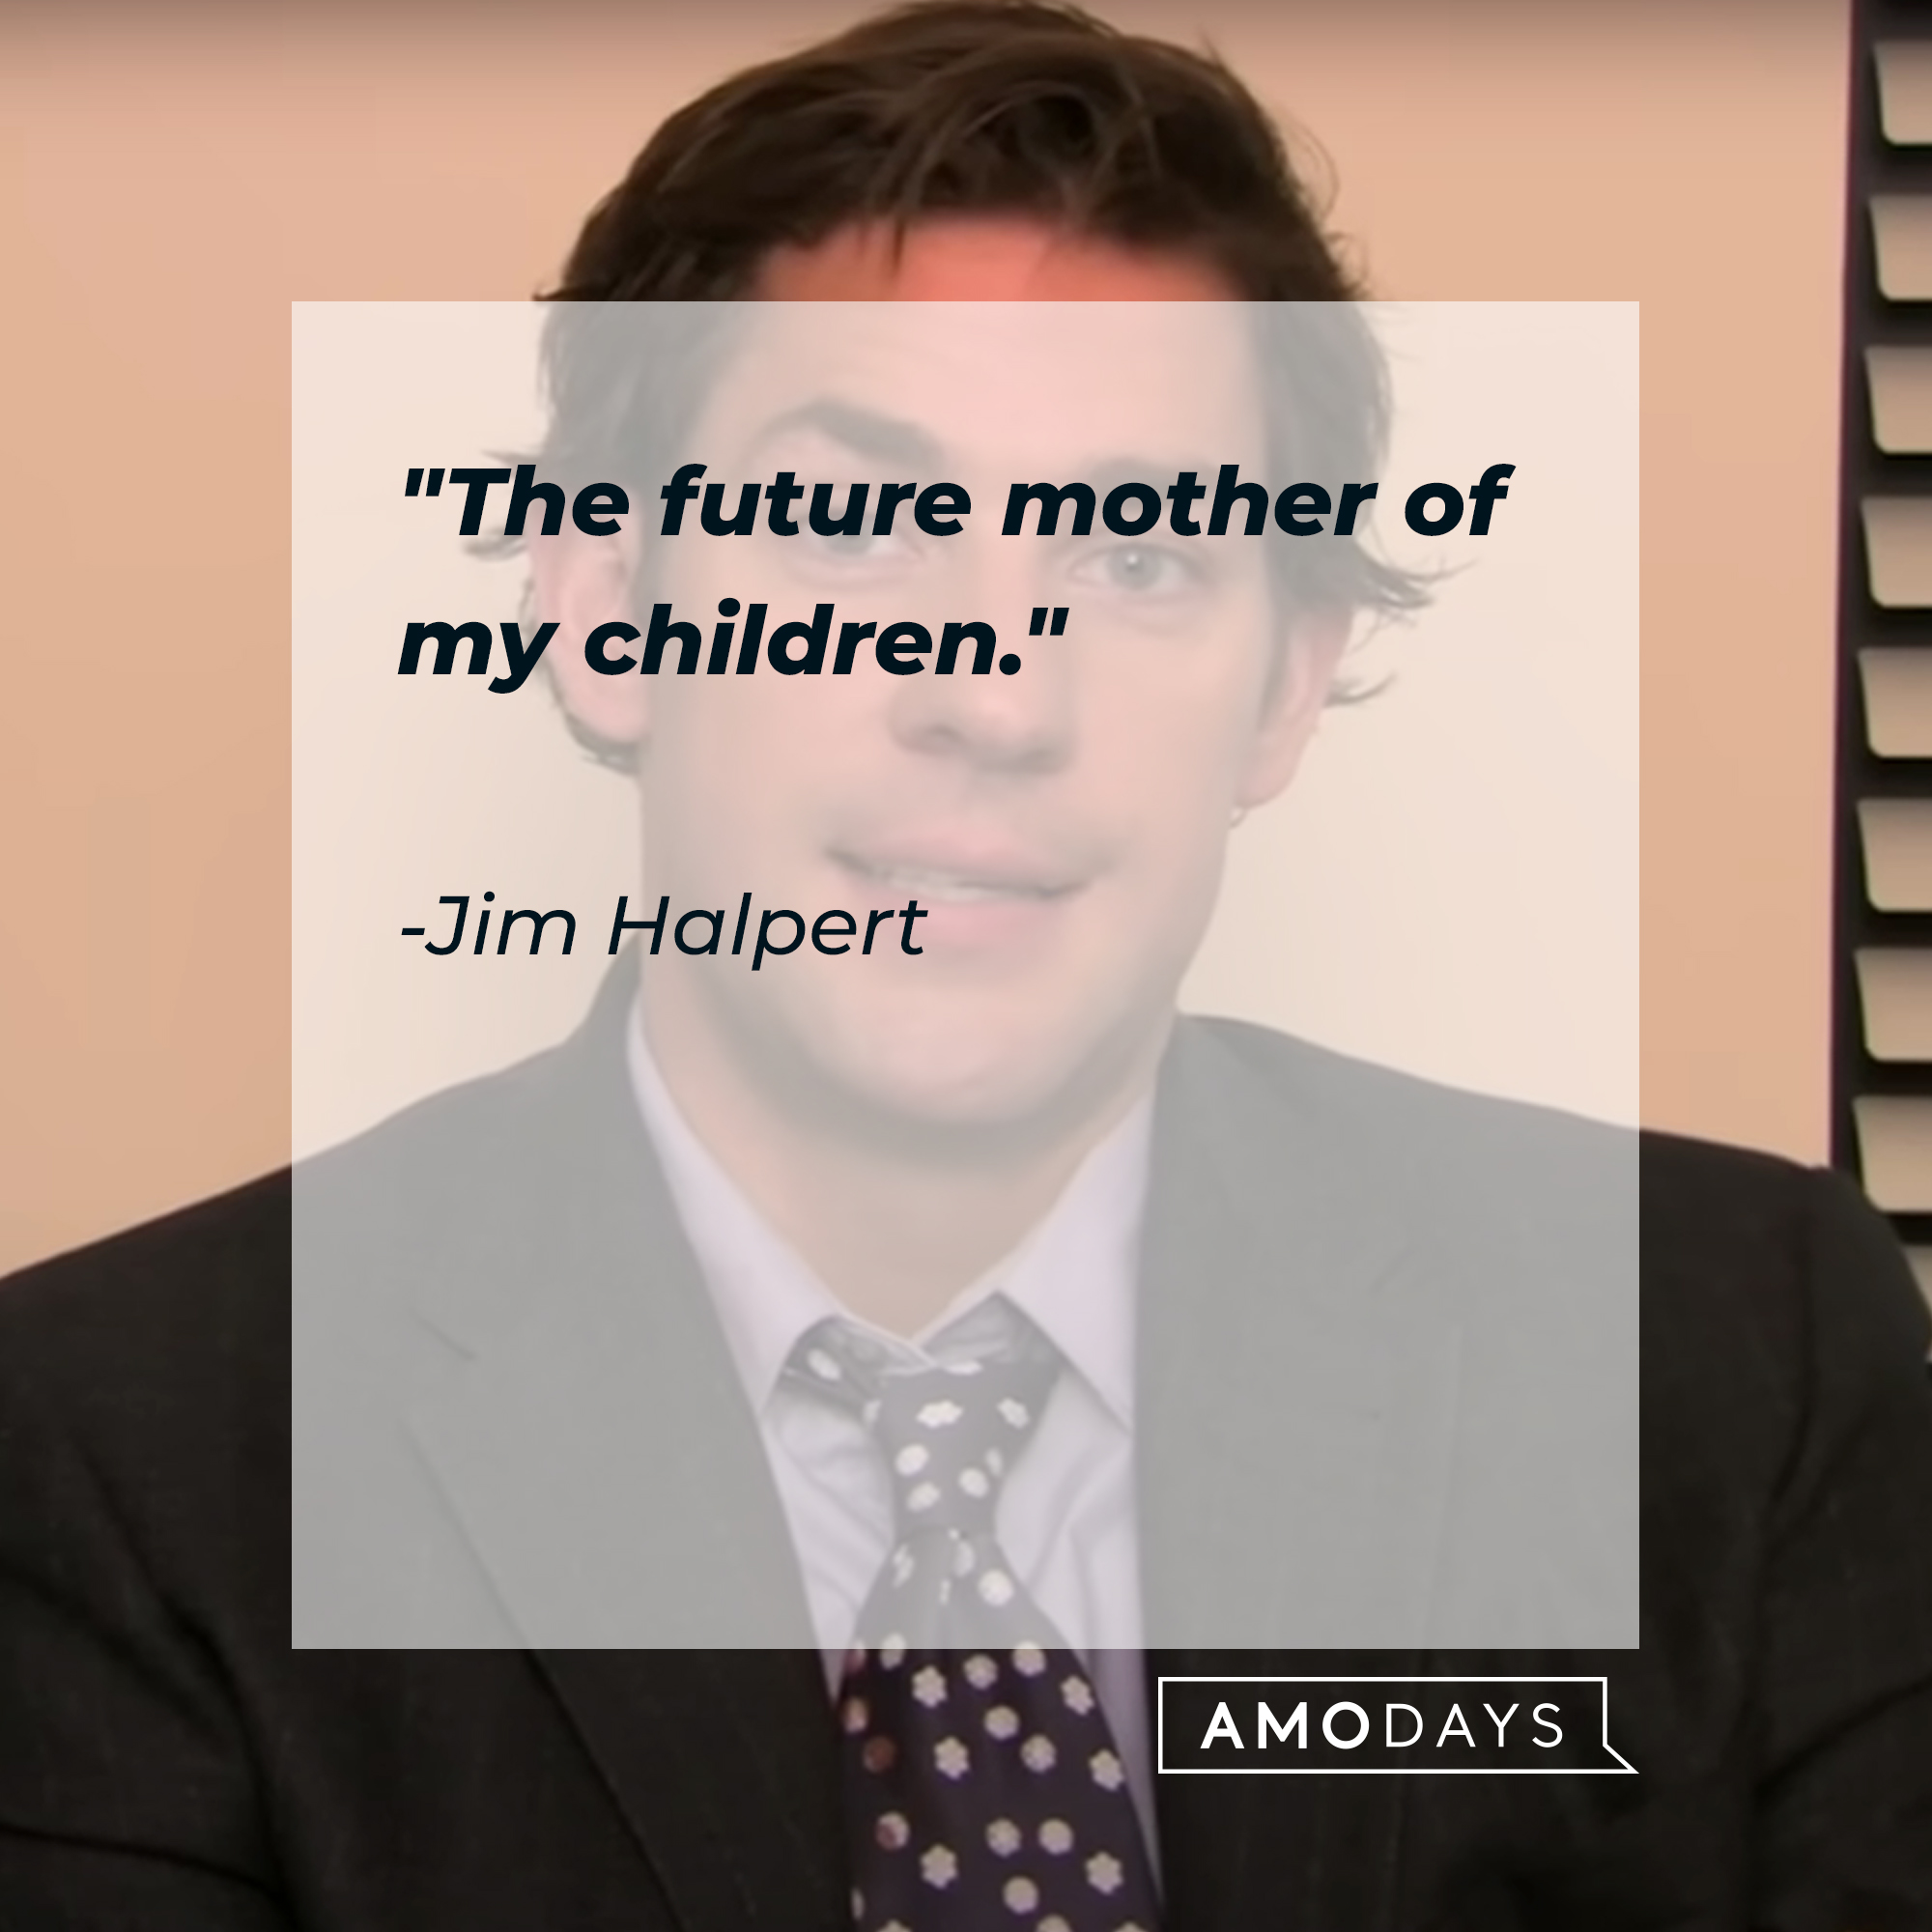 Jim Halpert's quote: "The future mother of my children." | Source: YouTube/TheOffice